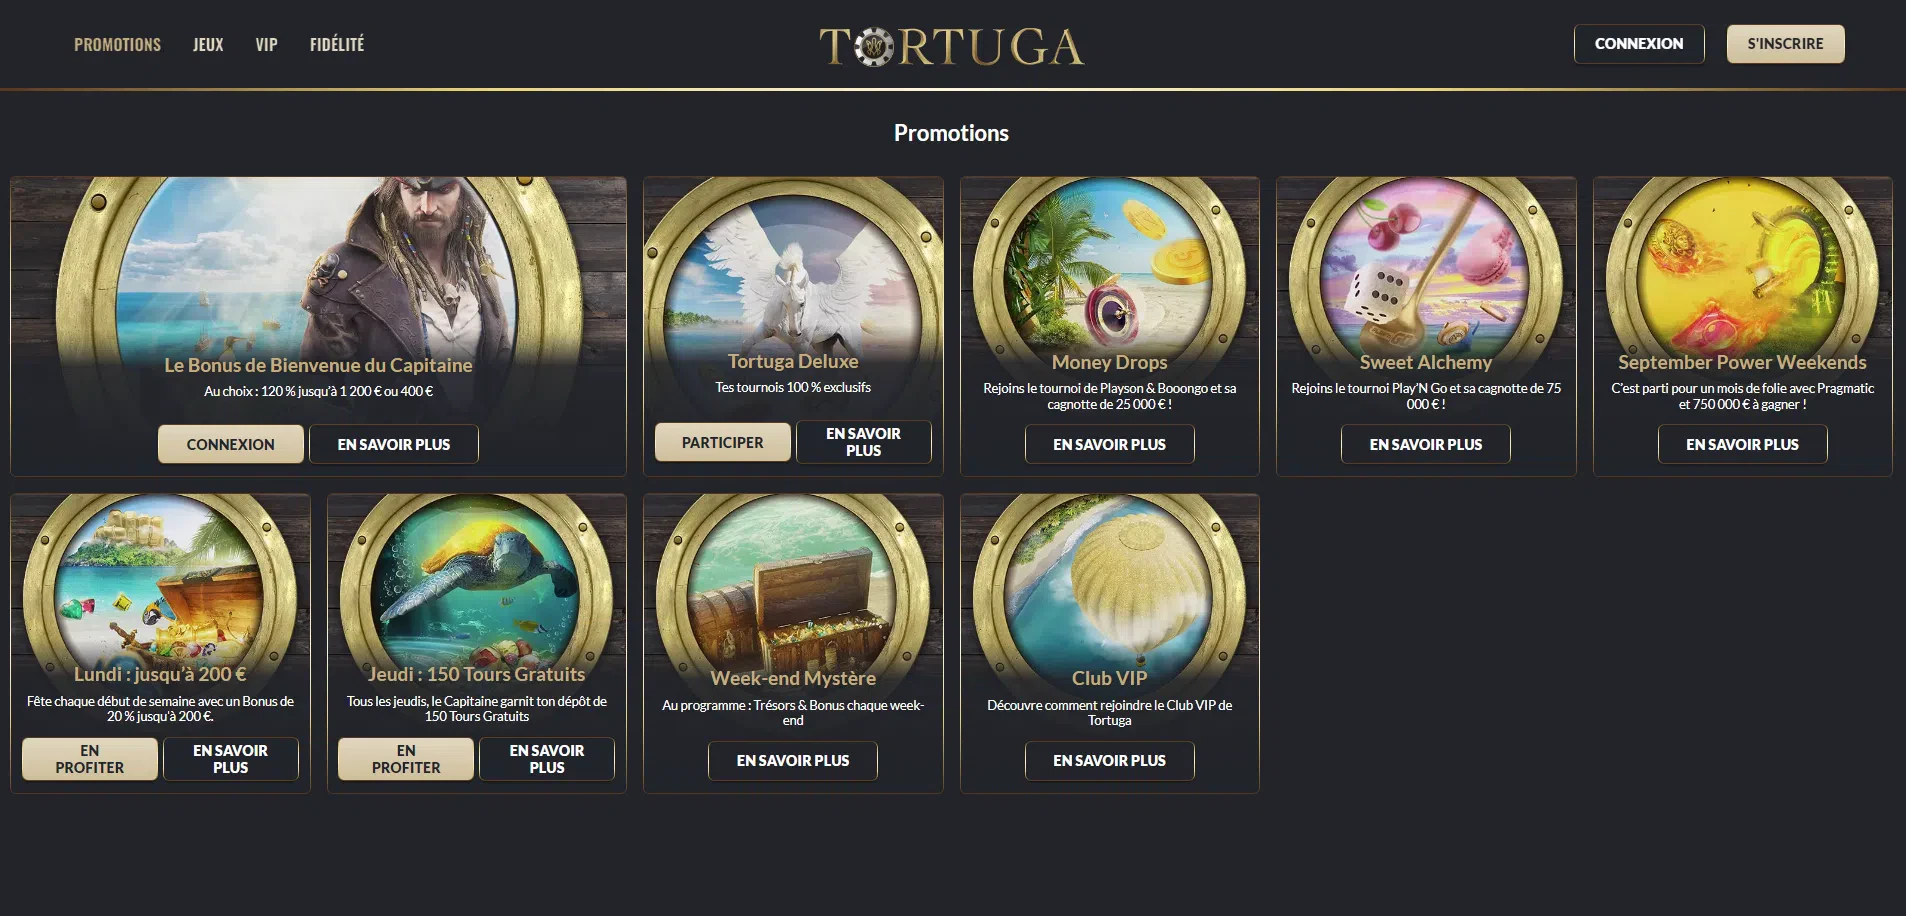 Tortuga promotions